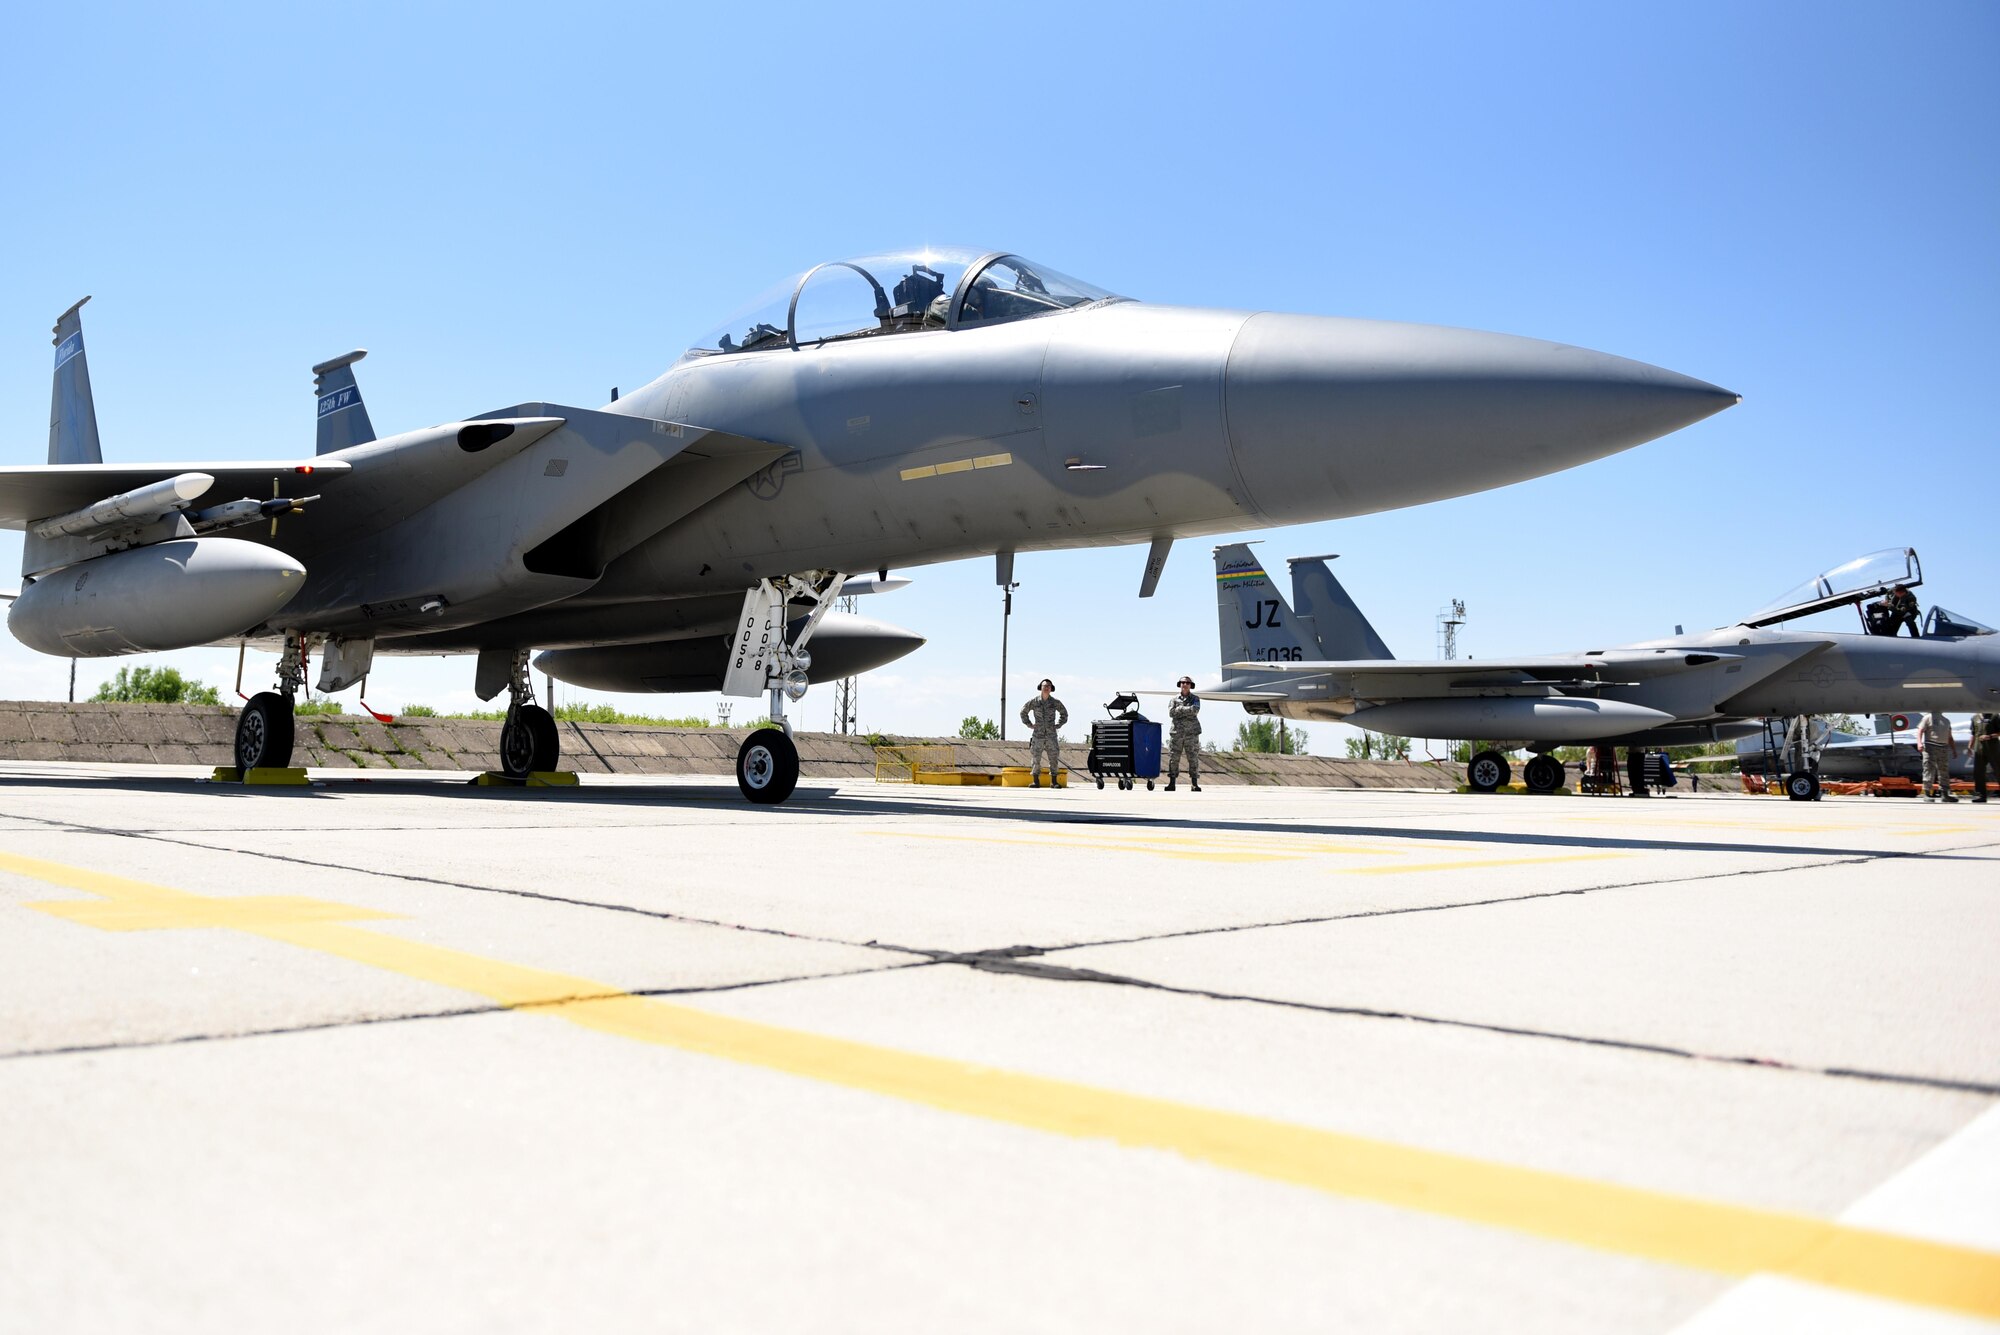 Twelve F-15C Eagles from the 122nd Expeditionary Fighter Squadron arrived at Graf Ignatievo Air Base, Bulgaria, April 26. Along with the aircraft, approximately 300 Airmen from the Louisiana and Florida Air National Guard are deployed to Europe as part of a Theater Security Package in support of Operation Atlantic Resolve with the goal of strengthening interoperability and enhancing regional security. (U.S. Air Force photo by Tech. Sgt. Staci Miller)